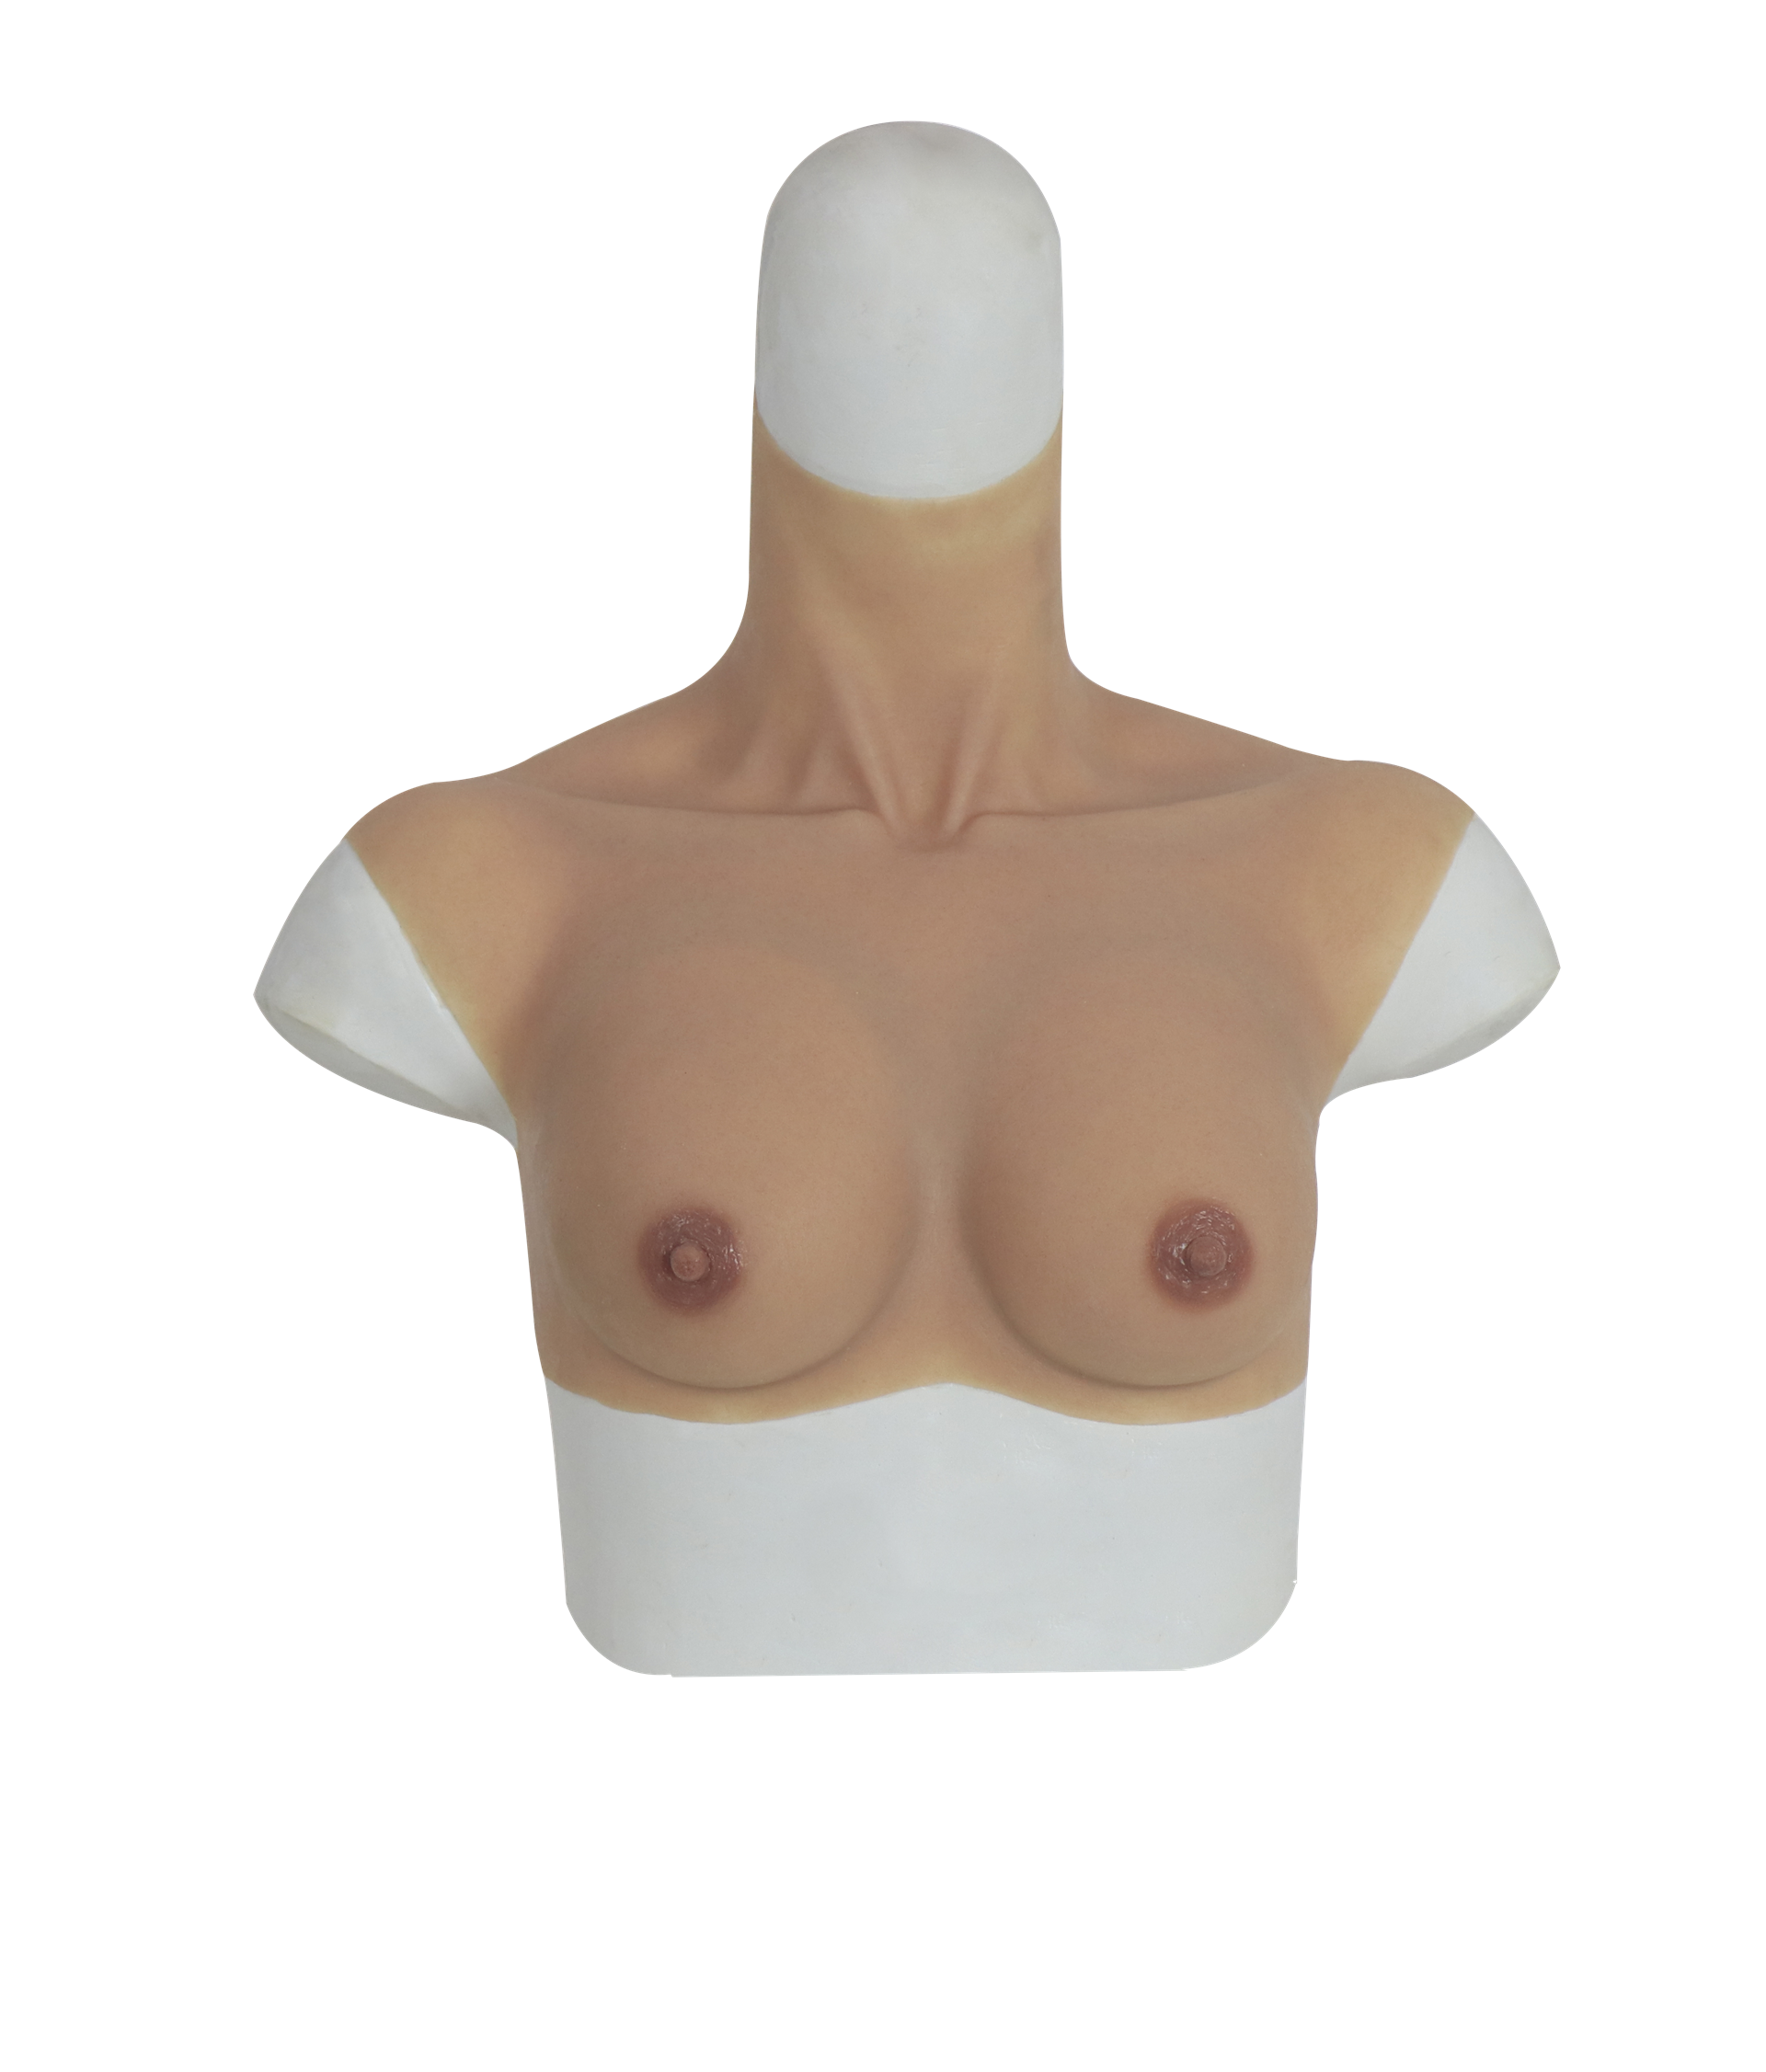 S-LINE | New B Cup and C Cup Silicone Breasts Enhanced Details